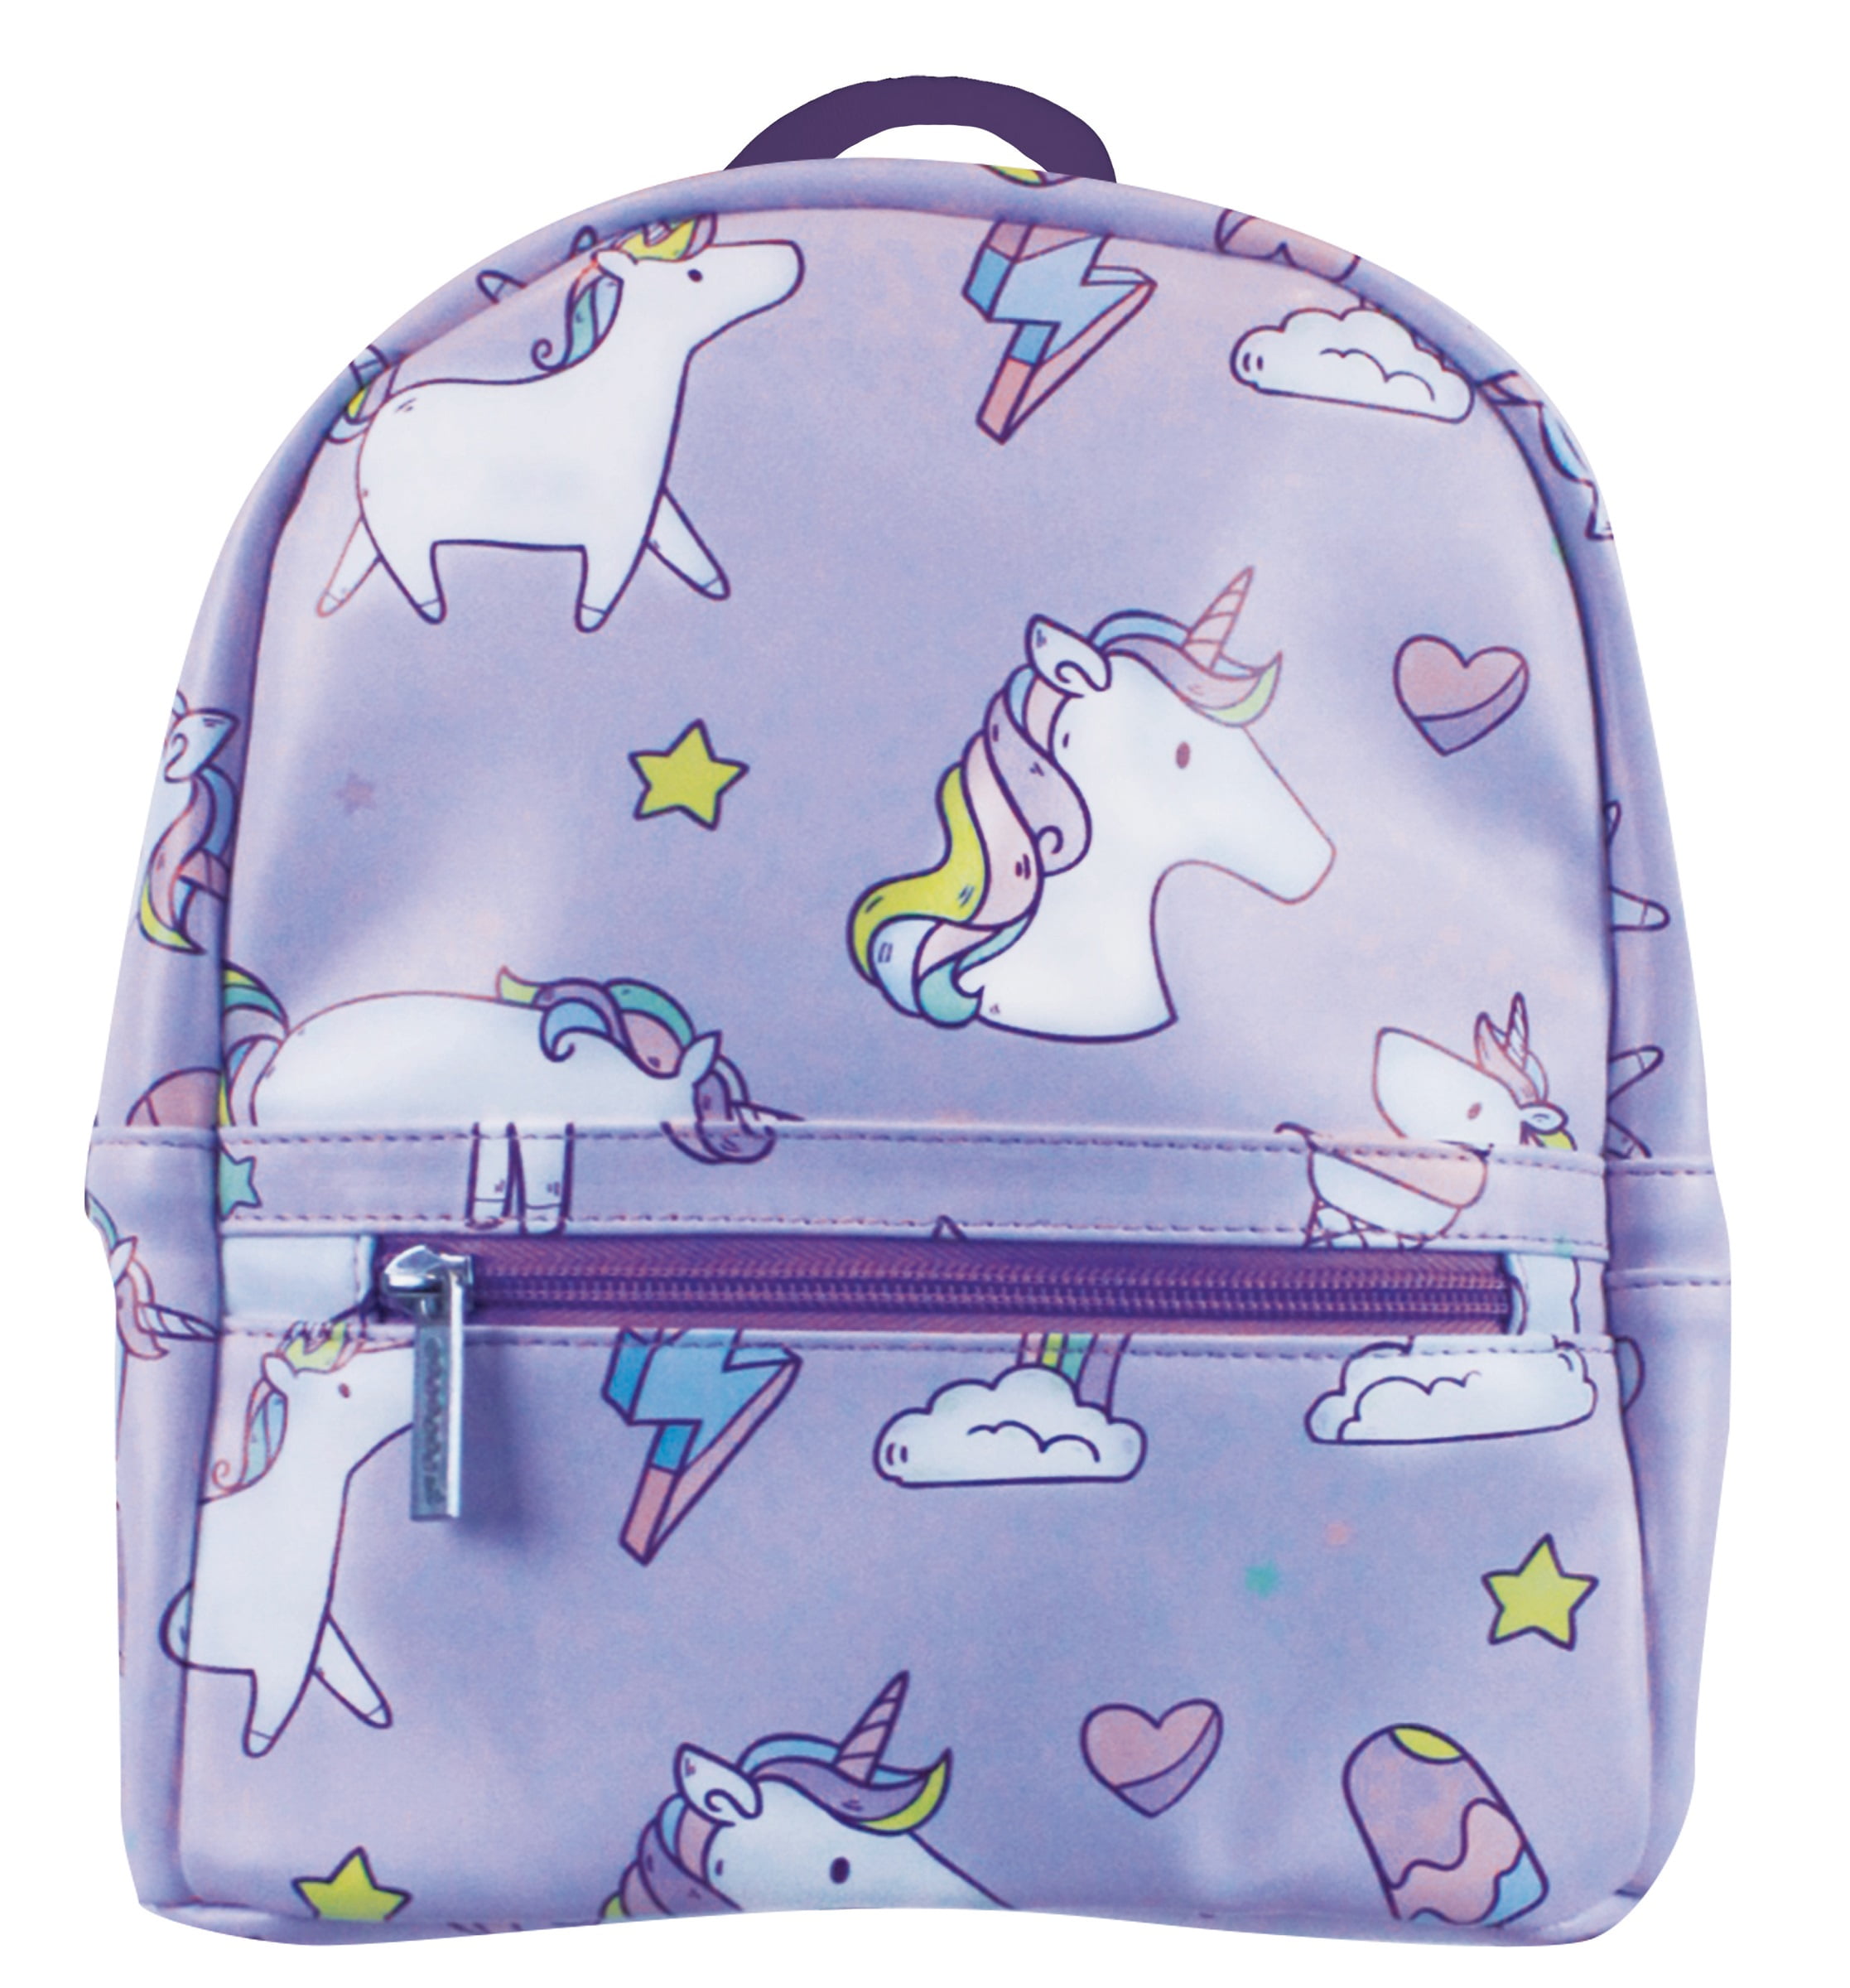 iscream 'Tie Dye Hearts' Deluxe Knapsack Style 16.5 x 13 Backpack for School and Travel 